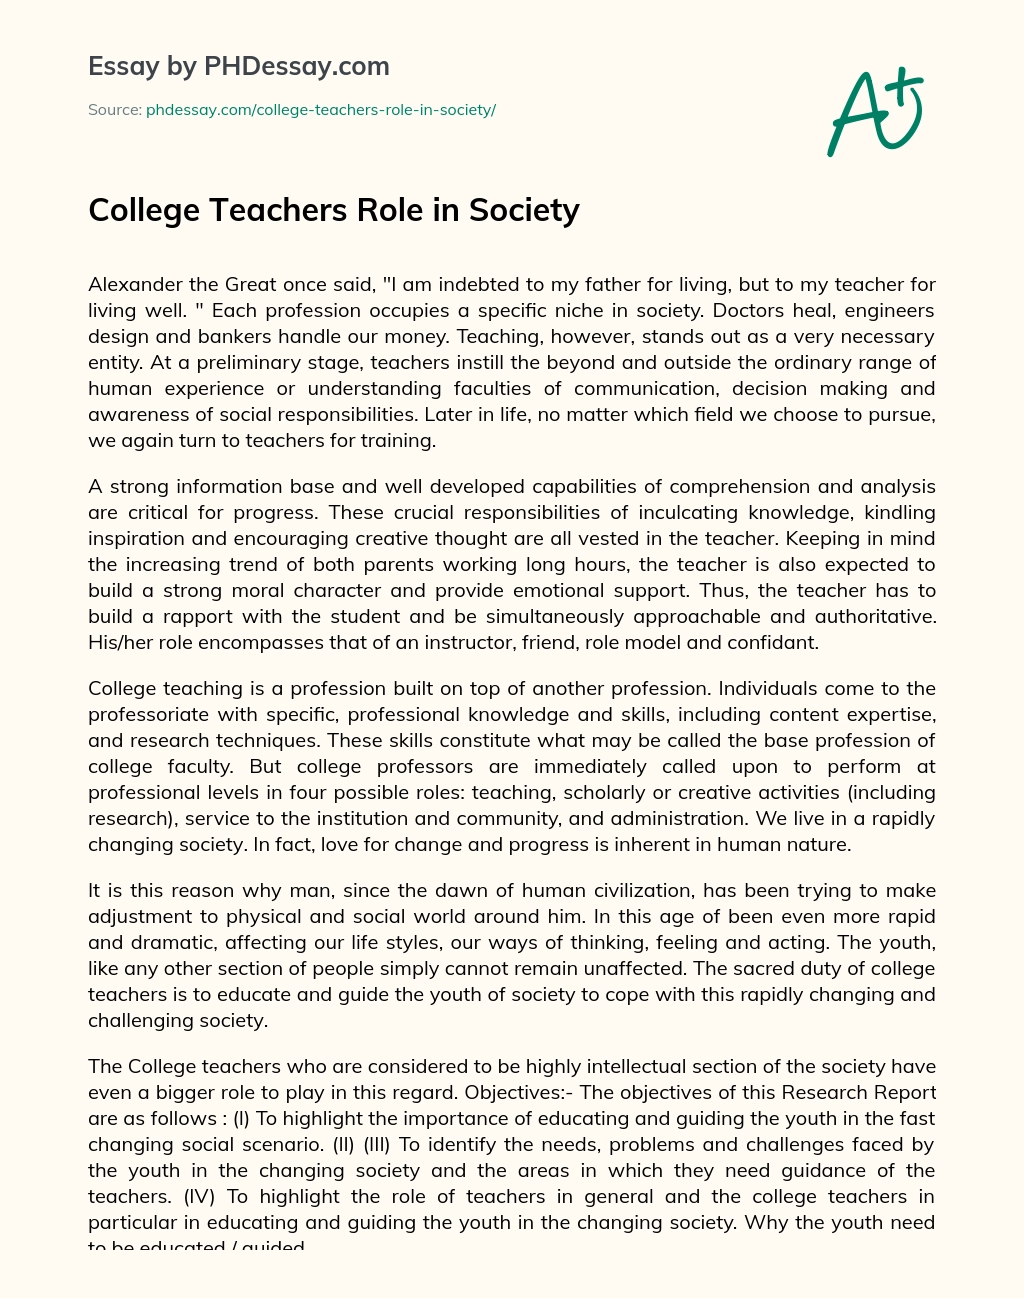 College Teachers Role in Society essay